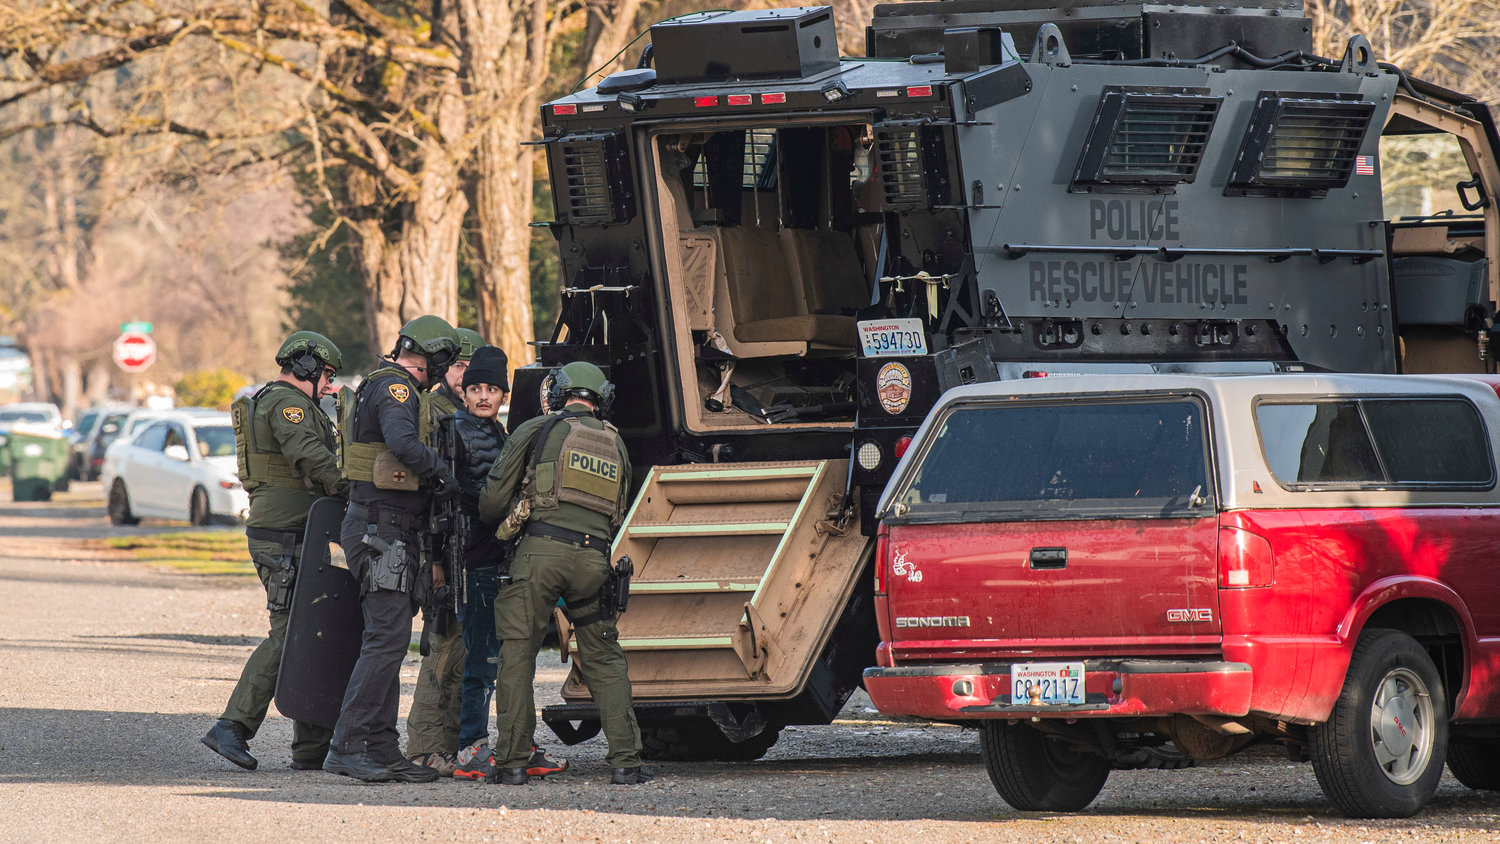 Law enforcement works to detain an individual in the 1300 block of Windsor Avenue in Centralia on Thursday.